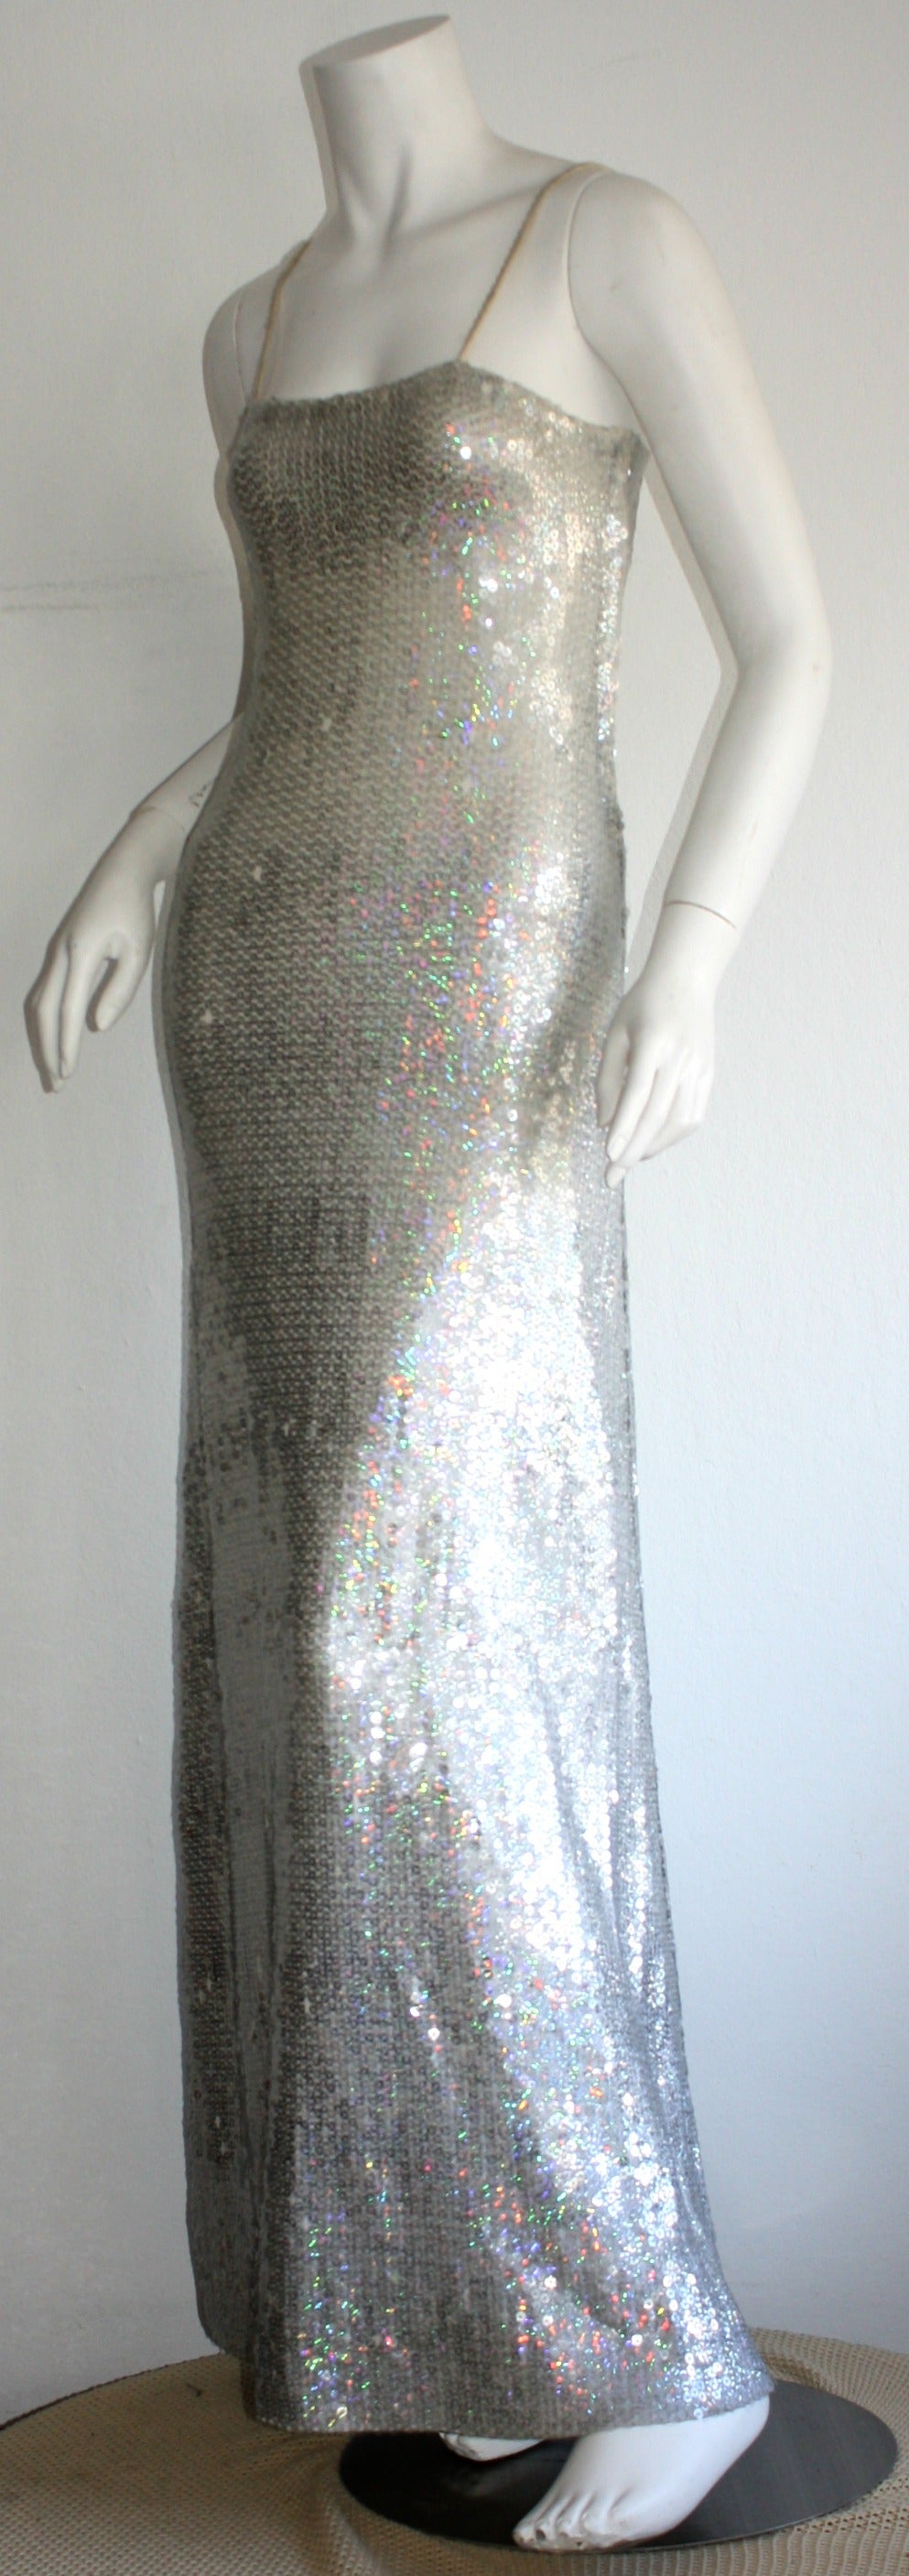 Stunning vintage 1970s Halston gown!!! Features all-over iridescent sequins. Beautiful silhouette, with a flowy mermaid hem. This is a true, rare beauty that is simply amazing on the body....Shimmers with every move! In good condition, with some